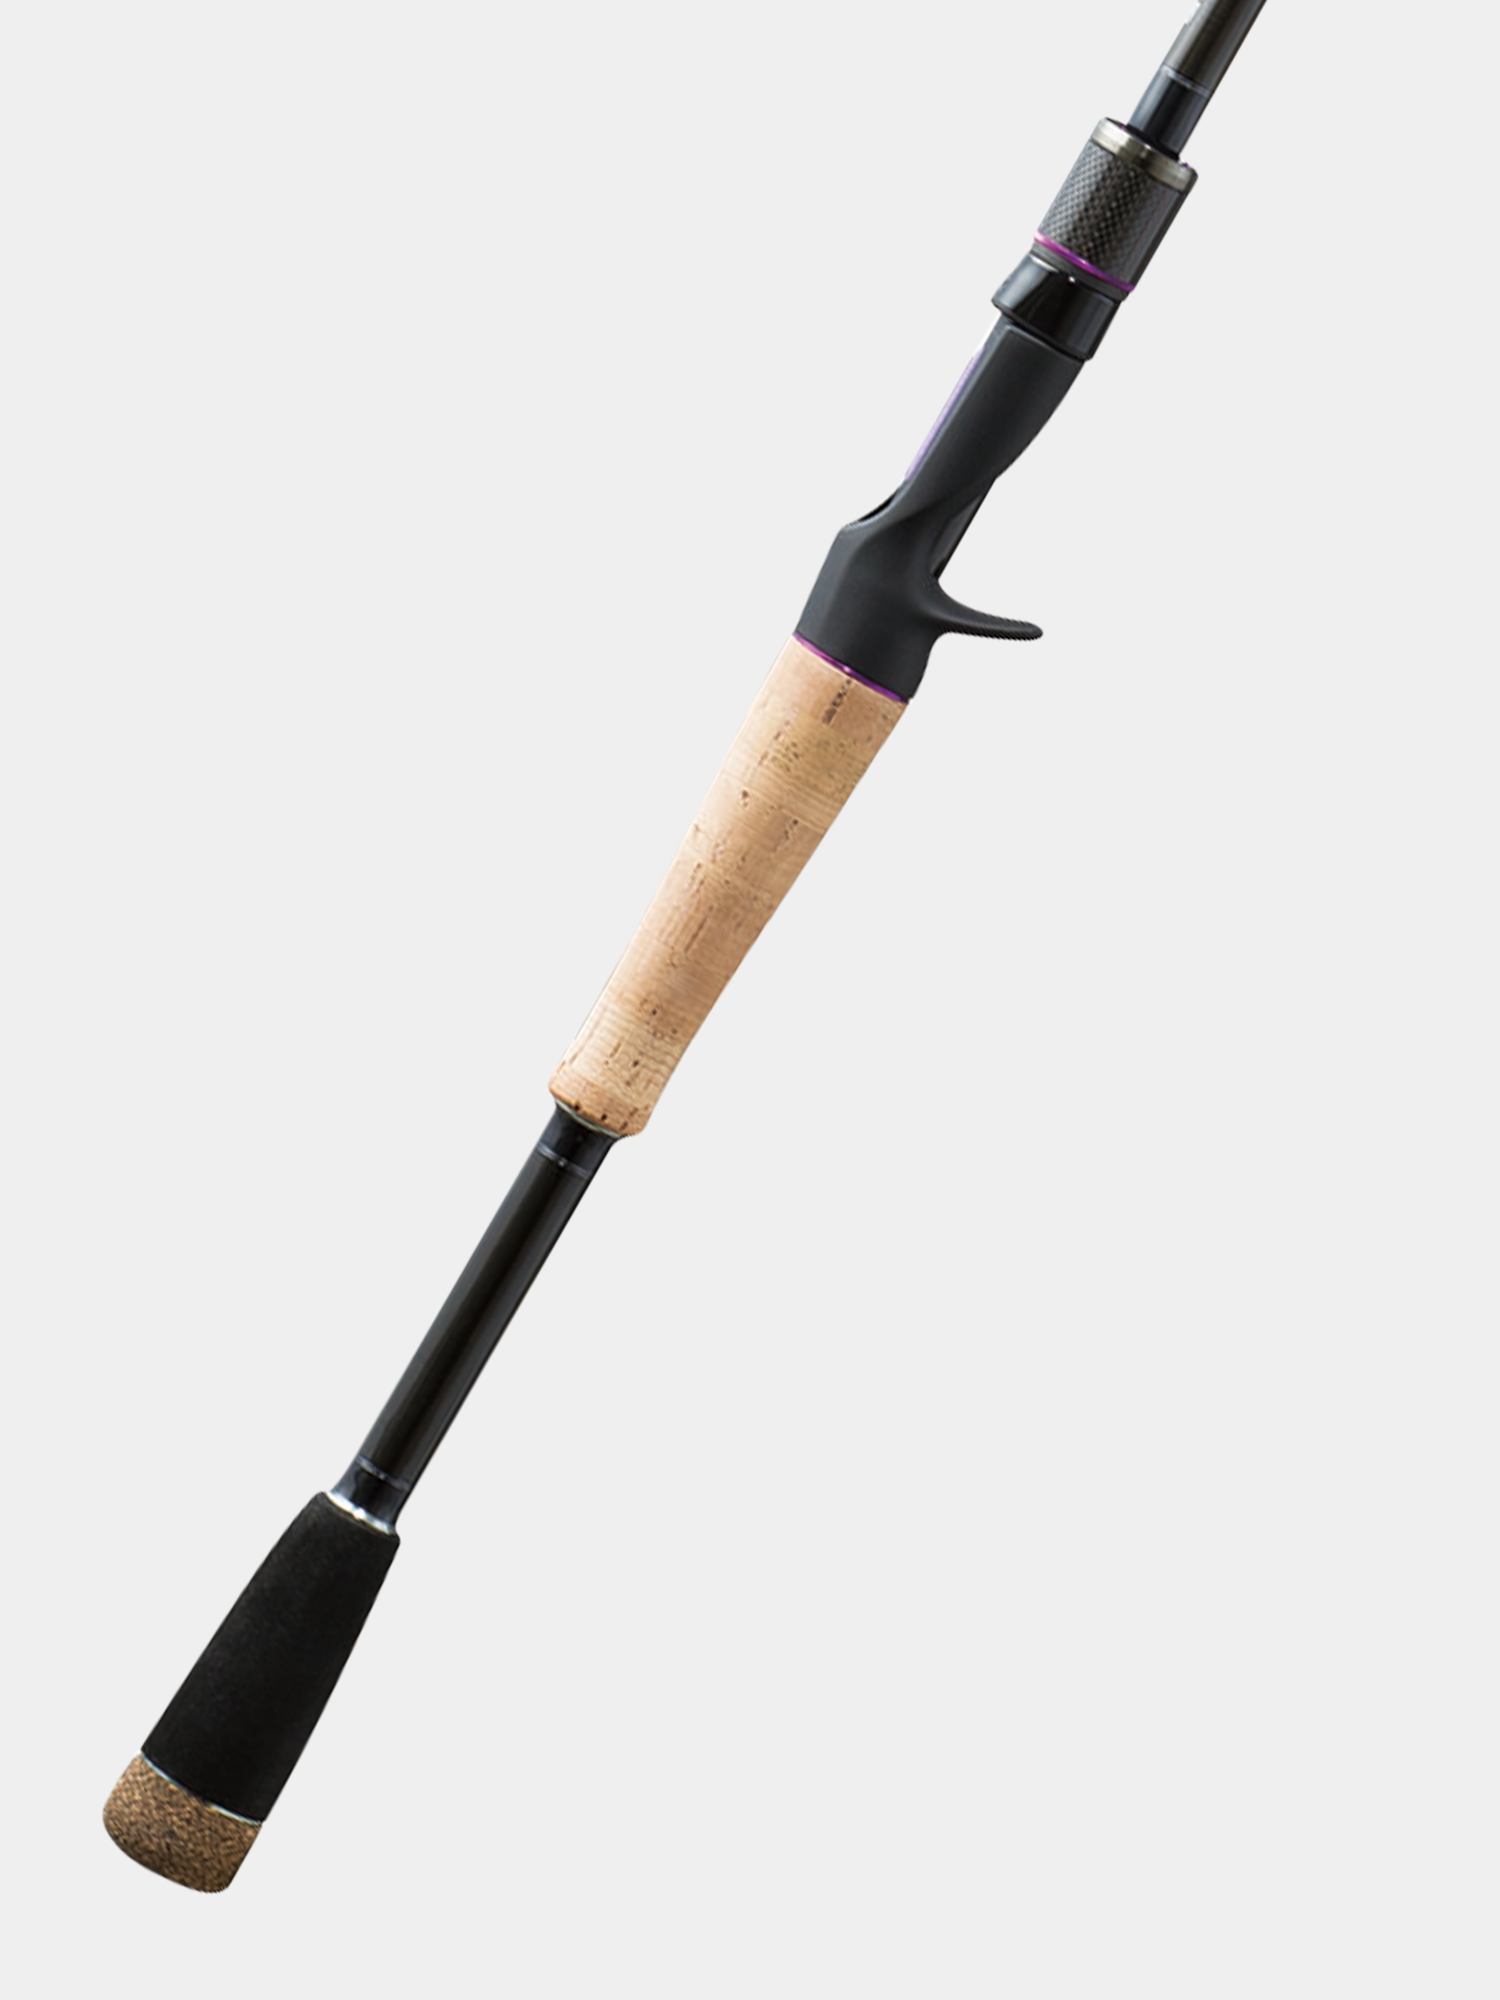 WILD SIDE 7'2” Medium Heavy Power Game Casting Rod by Arundel Tackle